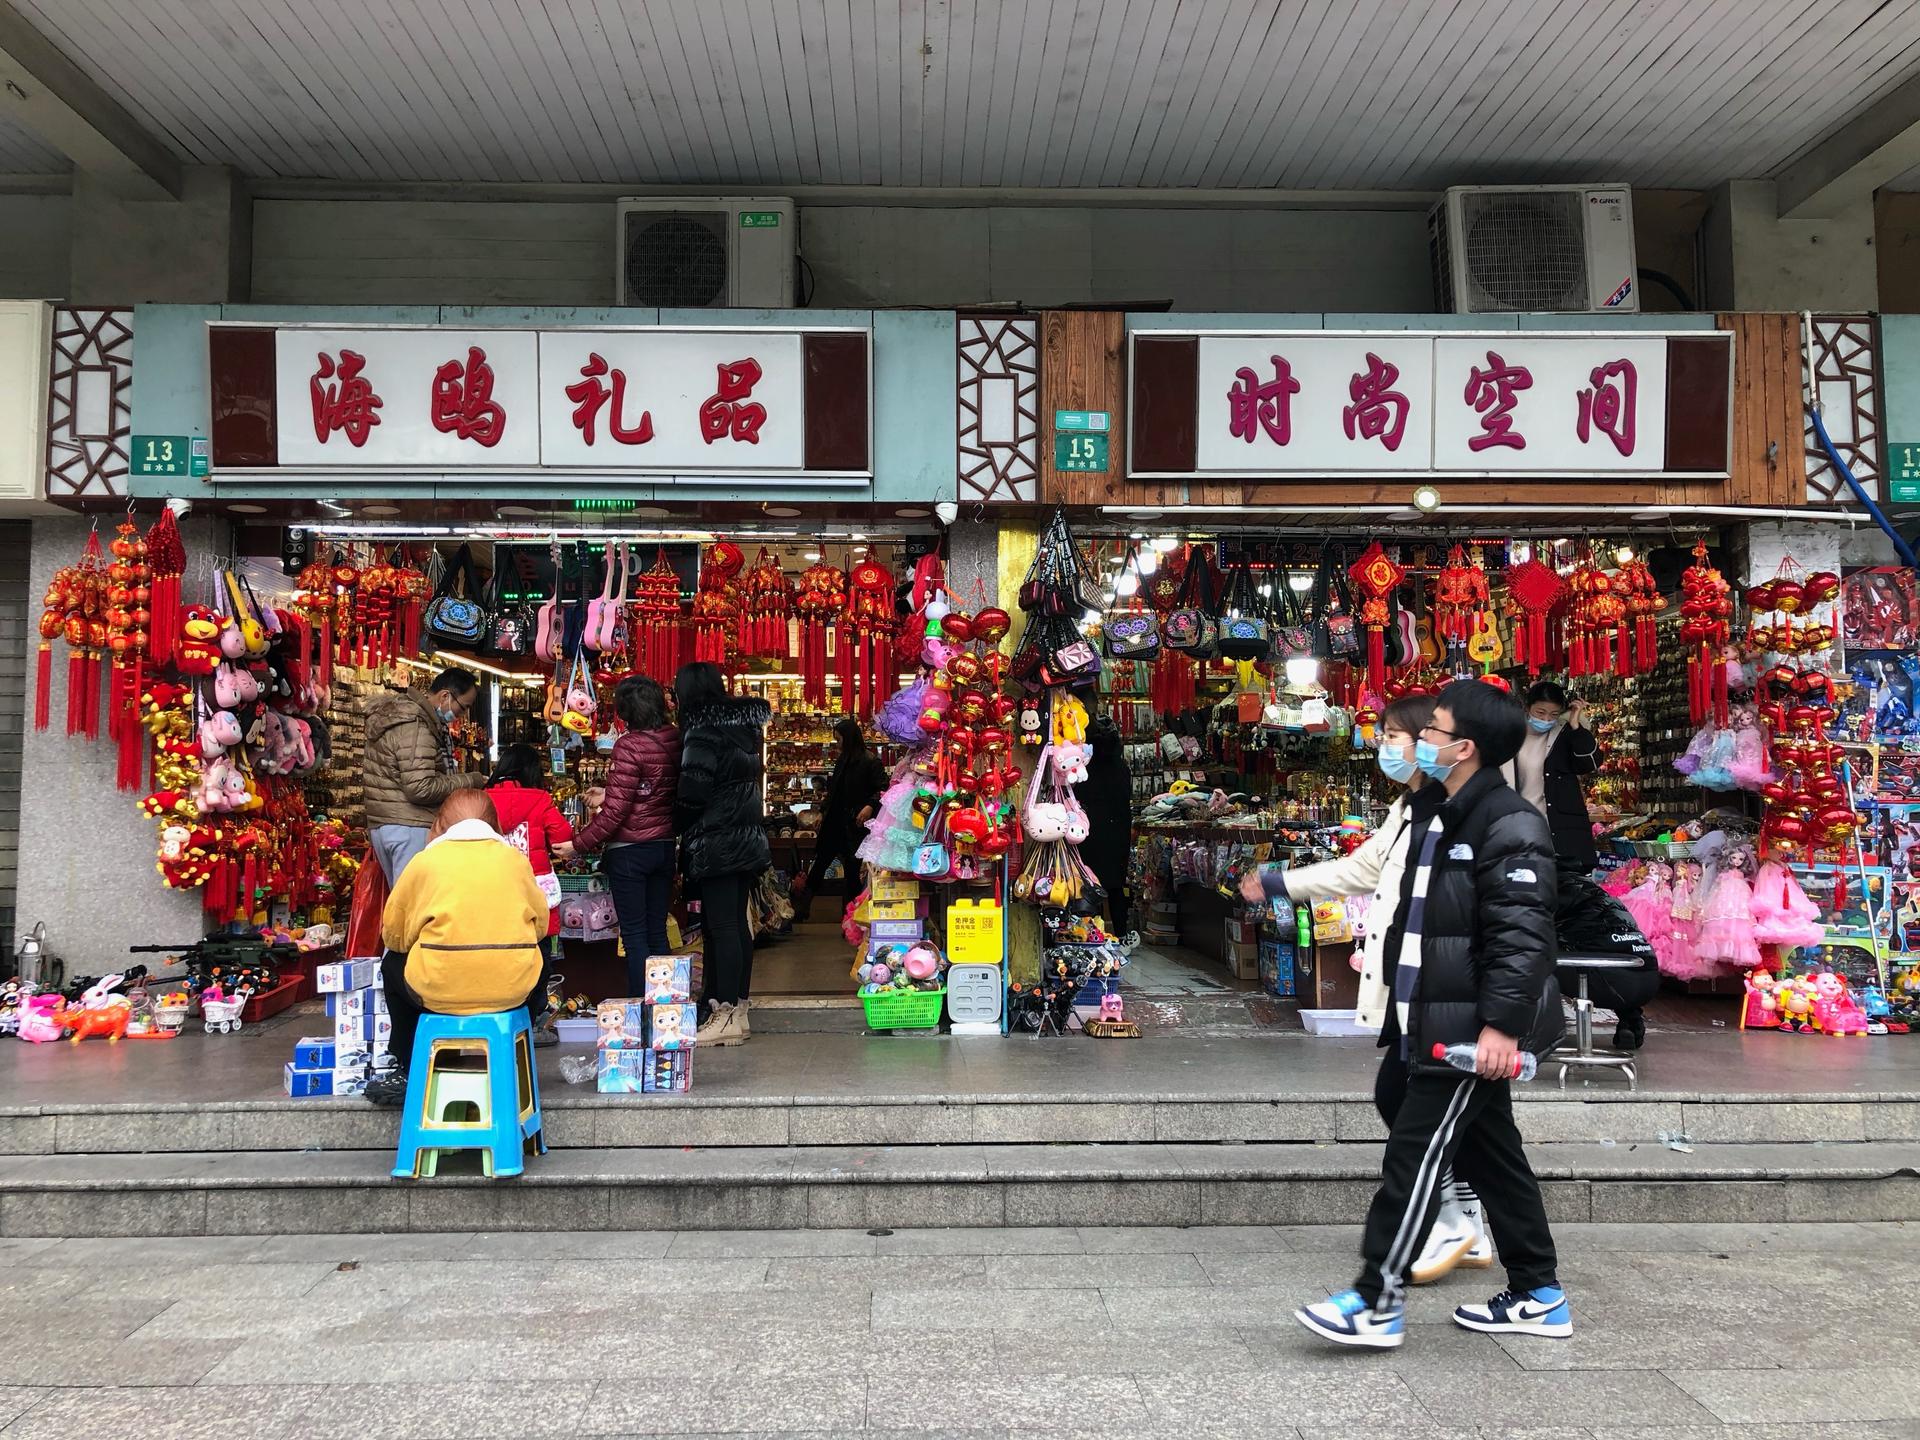 Chinese New Years' decorations for sale at Yu Gardens in Shanghai.